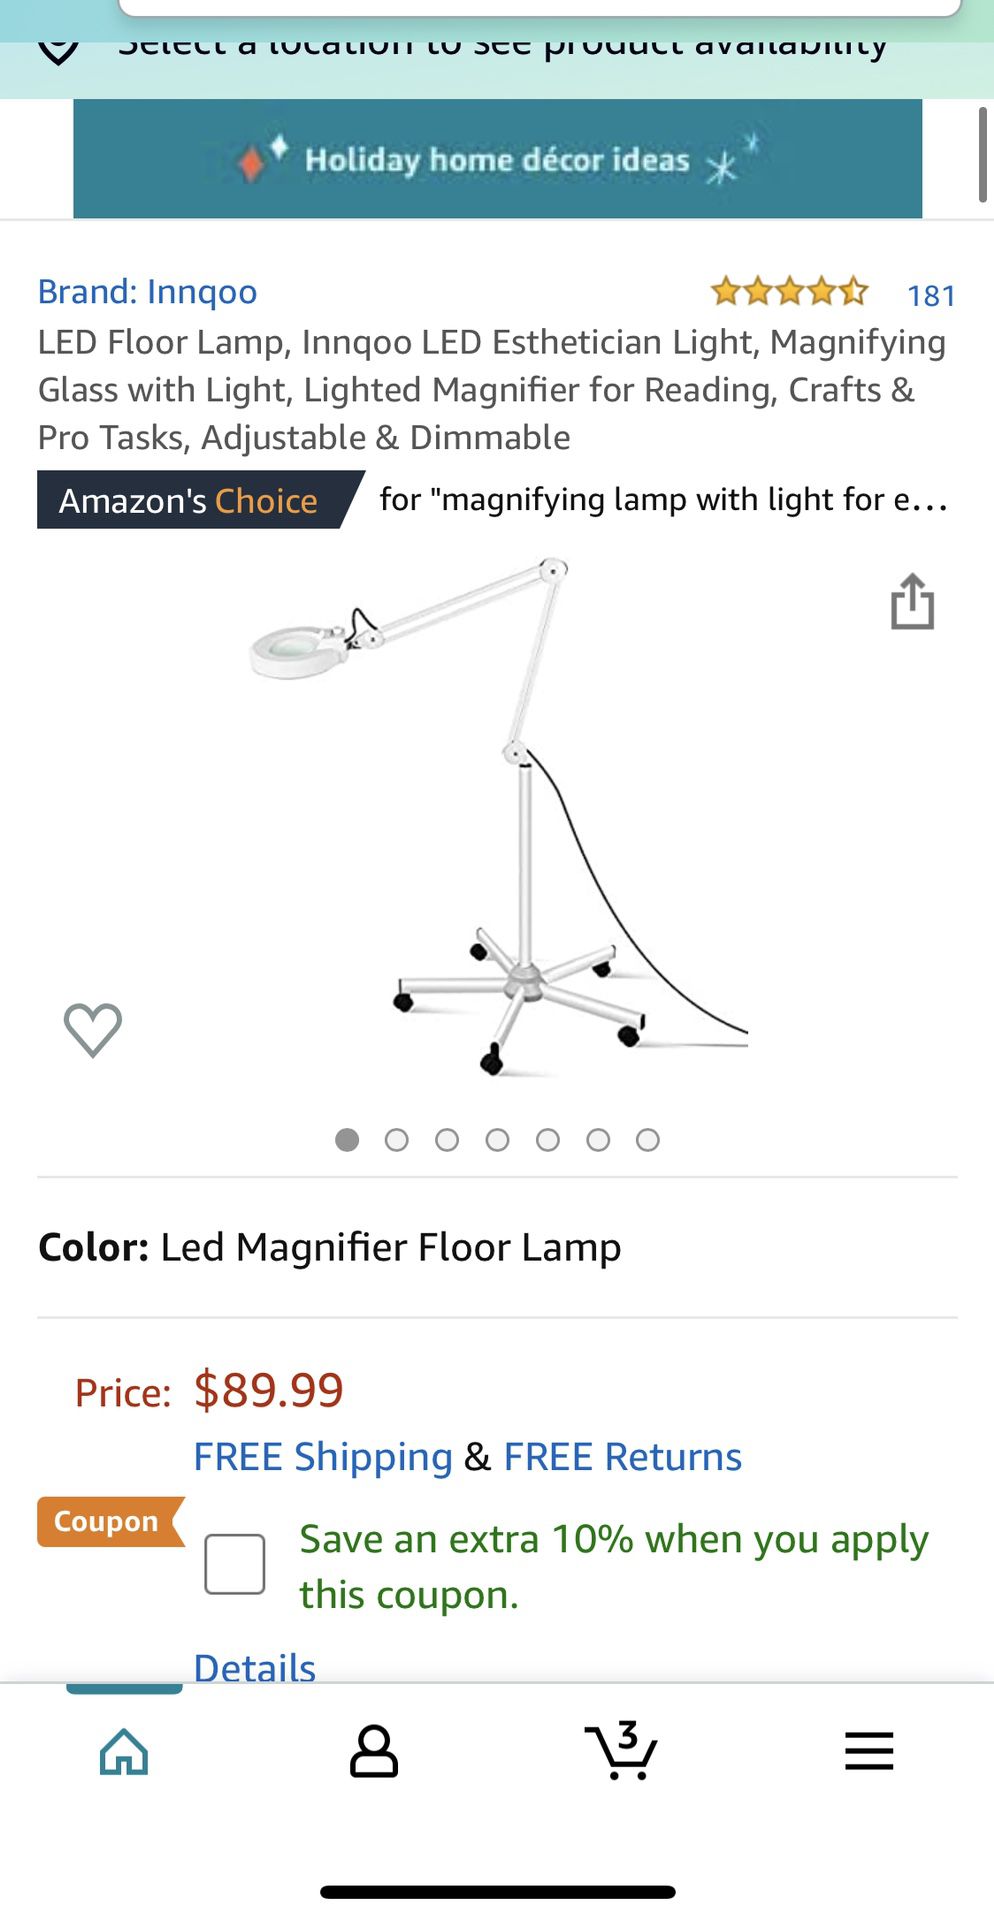 BRAND NEW! LED Floor Lamp, Innqoo LED Esthetician Light, Magnifying Glass with Light, Lighted Magnifier for Reading, Crafts & Pro Tasks